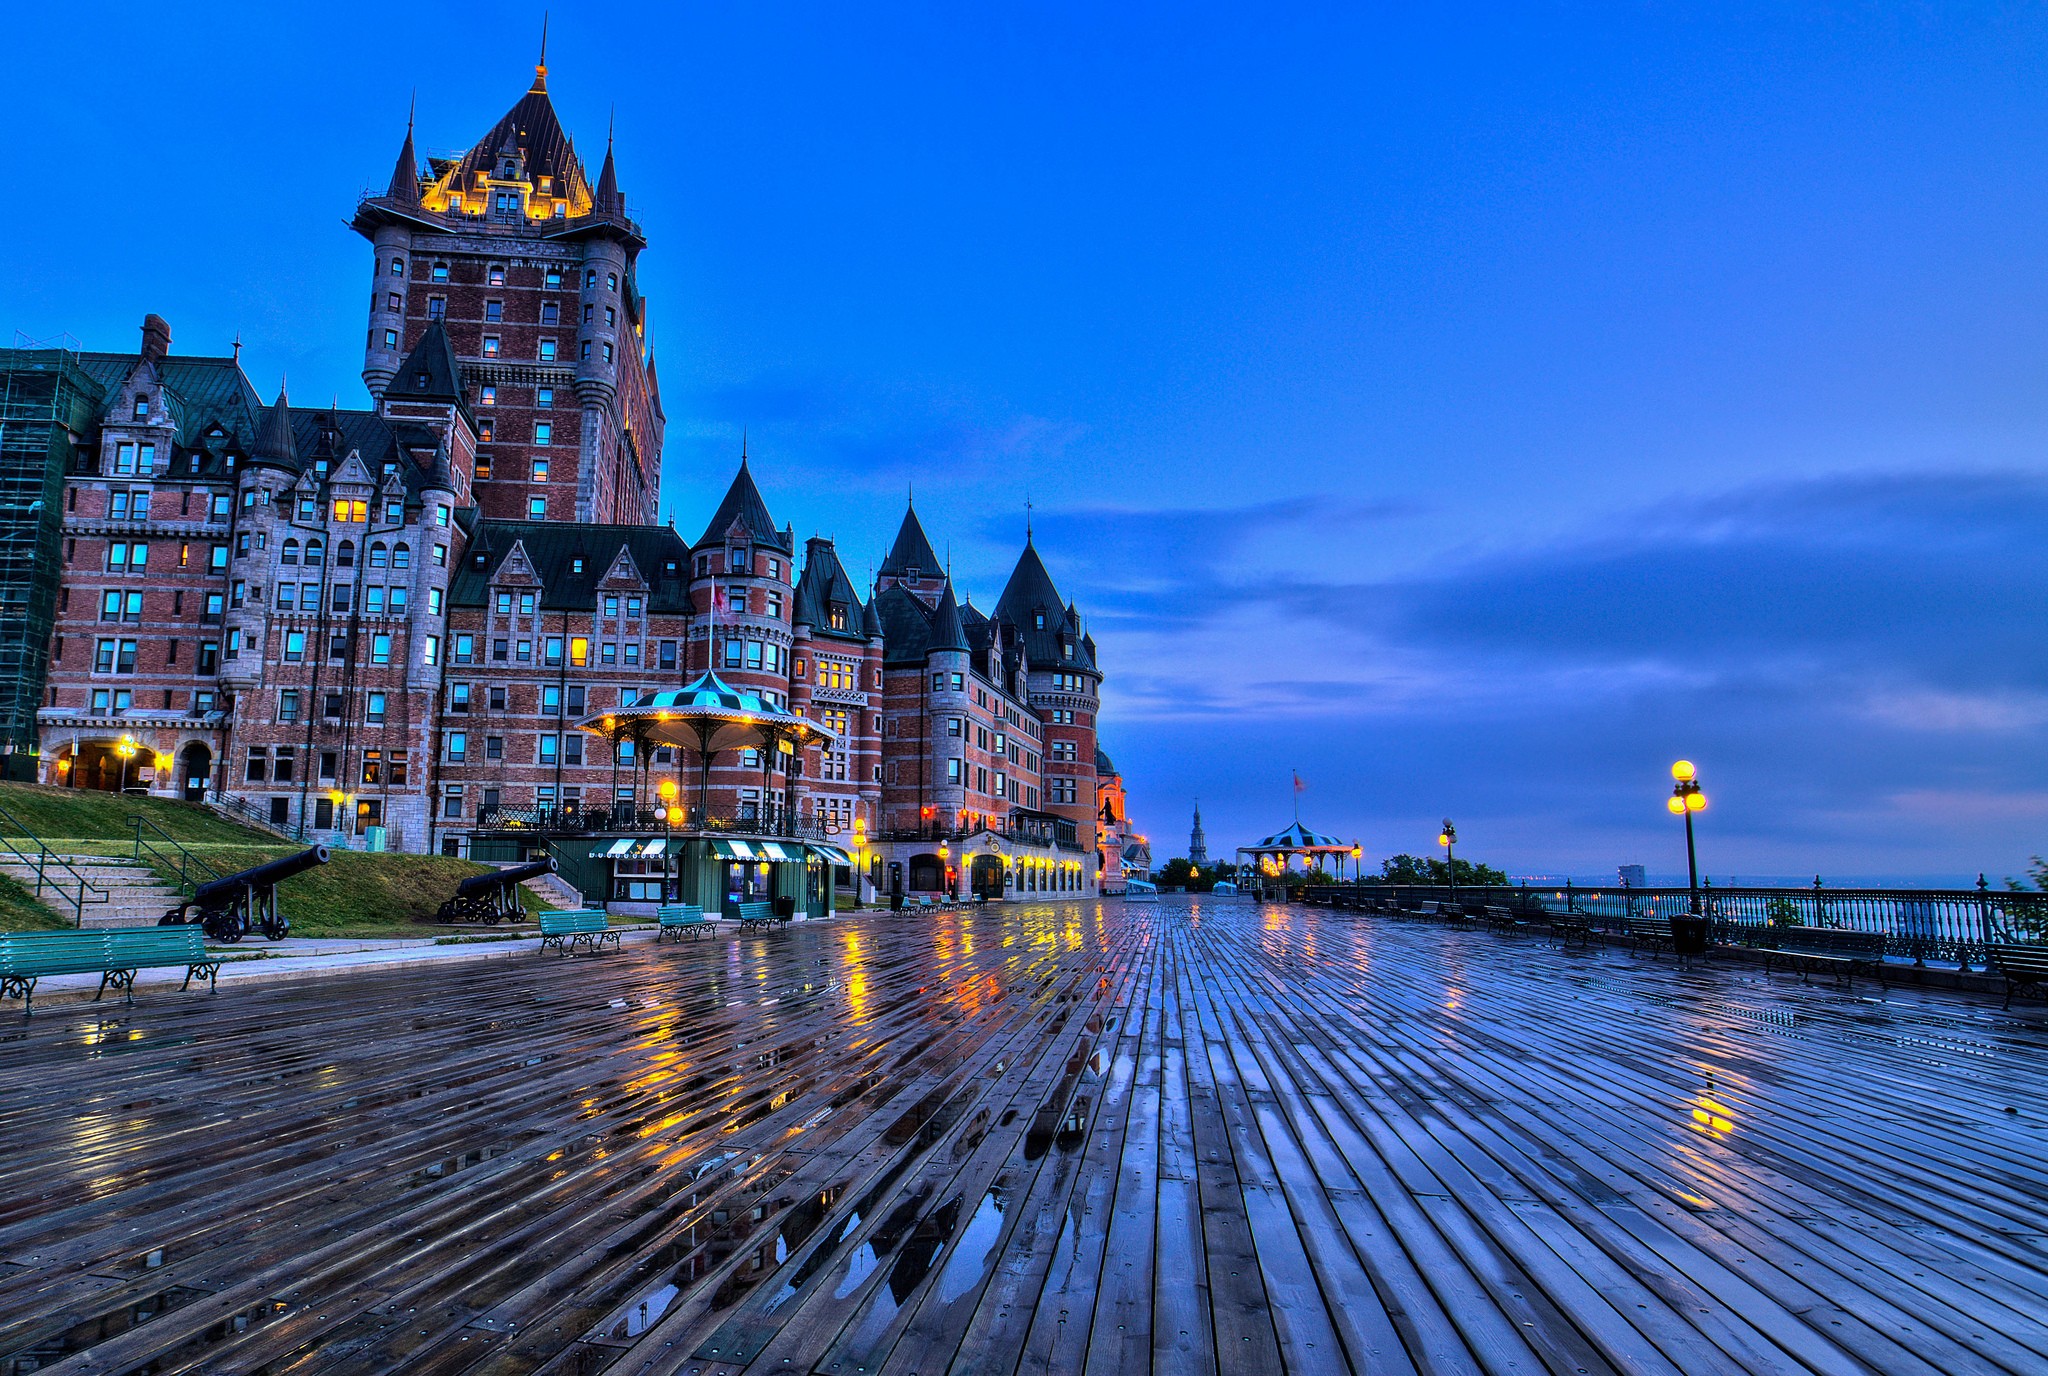 General 2048x1376 architecture building nature landscape trees Quebec Canada evening wet wooden surface wood planks water clouds reflection cannons lights Château Frontenac Terrasse Dufferin terraces hotel